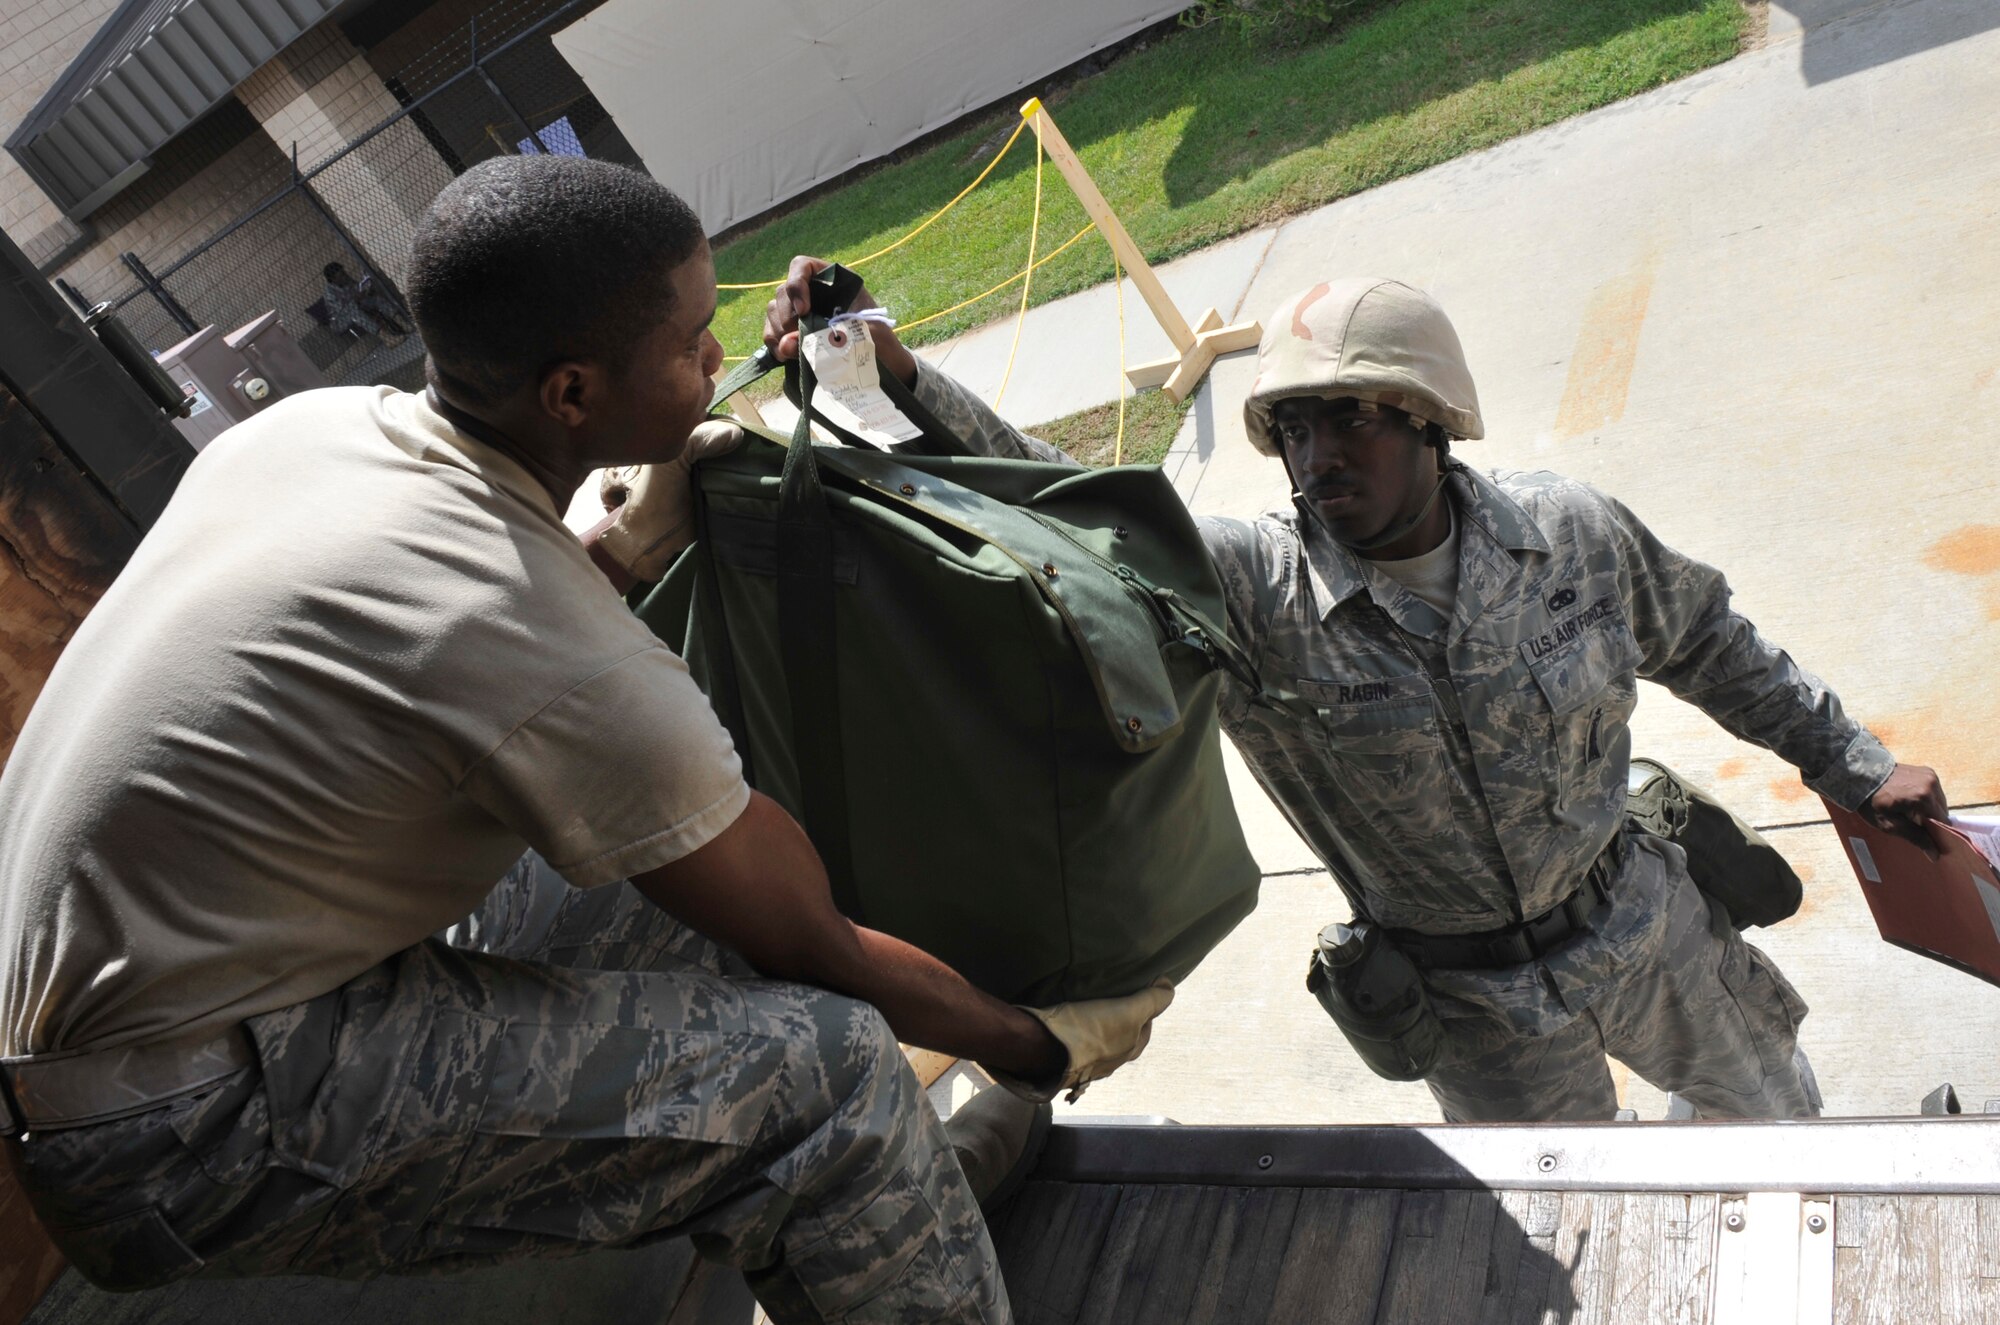 MOODY AIR FORCE BASE, Ga. -- Airman First Class Lamaro Colvin, 23rd Logistics Readiness Squadron vehicle management and analysis member, takes a mobility bag from Staff Sgt. Harrison Ragin, 23rd Aircraft Maintenance Squadron aircraft armament technician, during the Phase I Operational Readiness Inspection here Sept. 21. (U.S. Air Force photo by Senior Airman Schelli Jones)